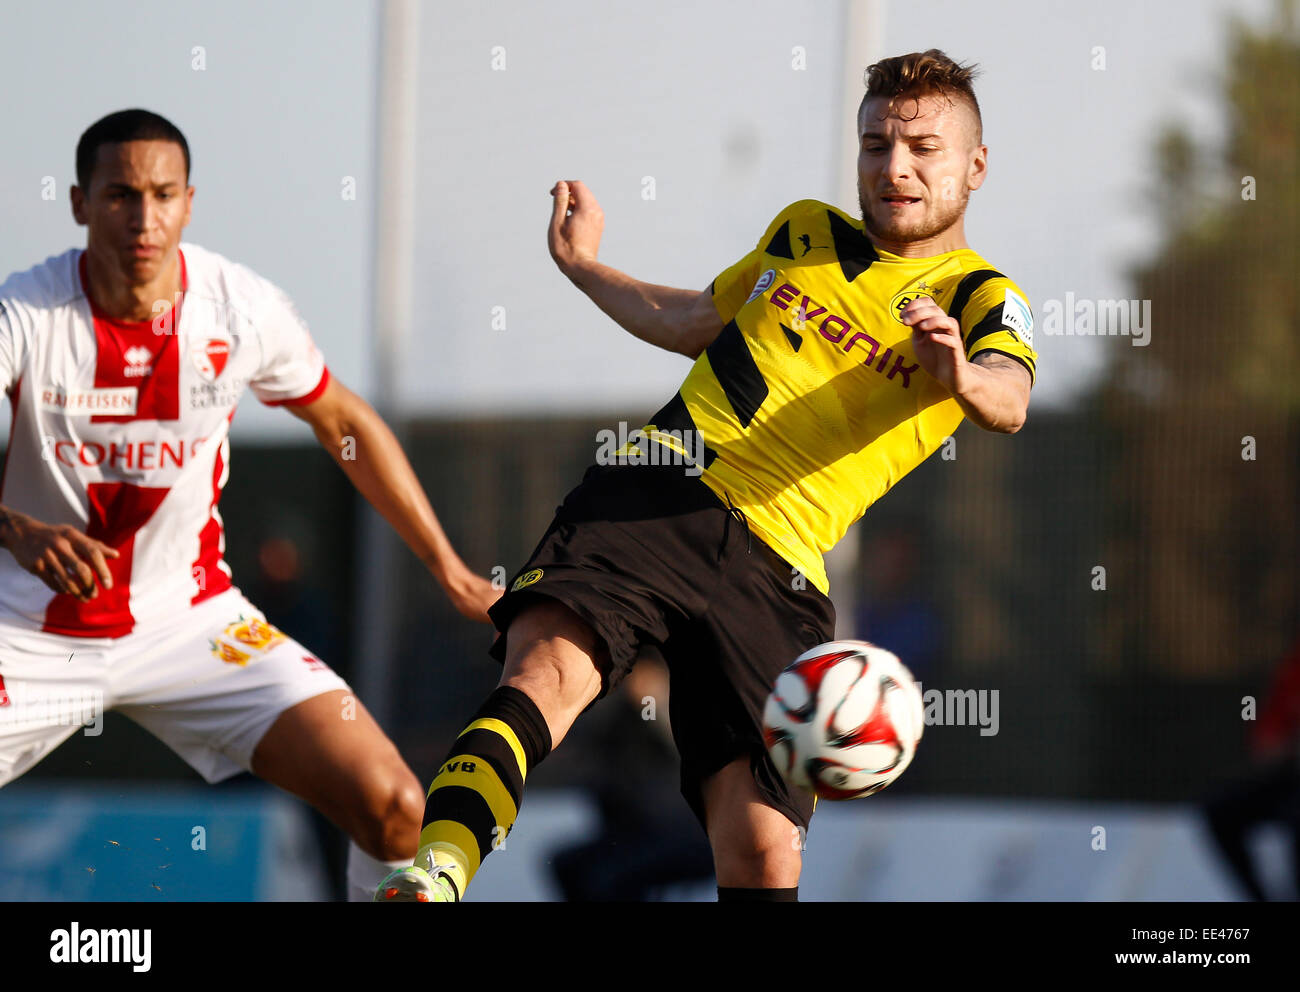 San Pedro del Pinatar, Spain. 13rd January, 2015. Friendly football match between Borussia Dortmund vs FC Sion in the Pinatar Arena Sport Center. Immobile Credit:  ABEL F. ROS/Alamy Live News Stock Photo